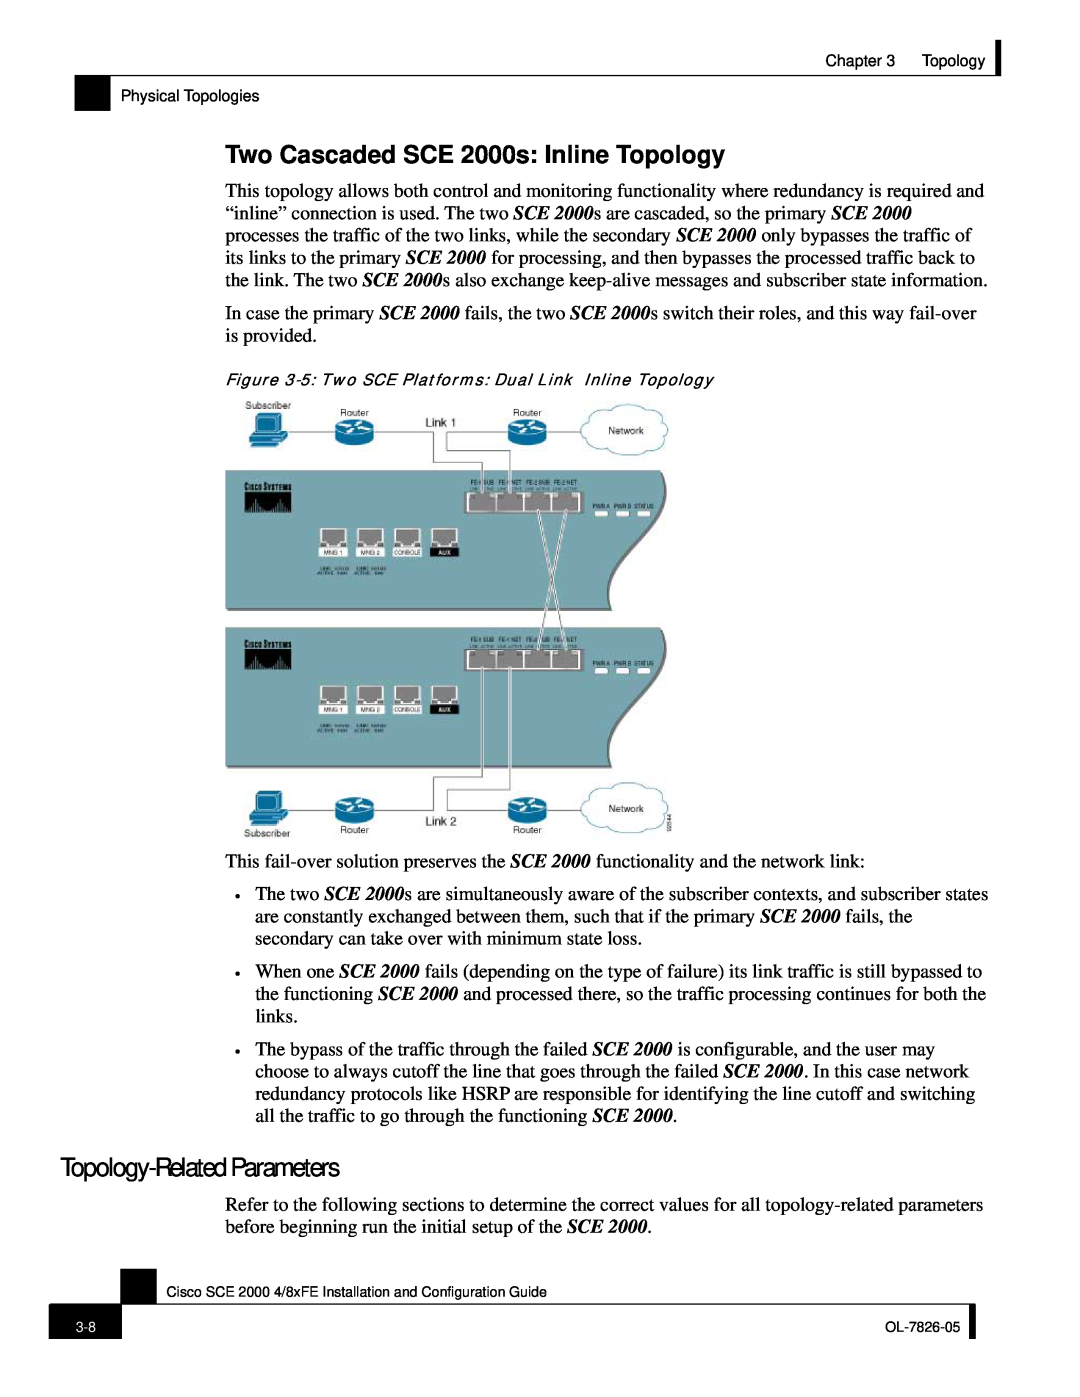 Cisco Systems SCE 2000 4/8xFE manual Topology-Related Parameters, Two Cascaded SCE 2000s Inline Topology 